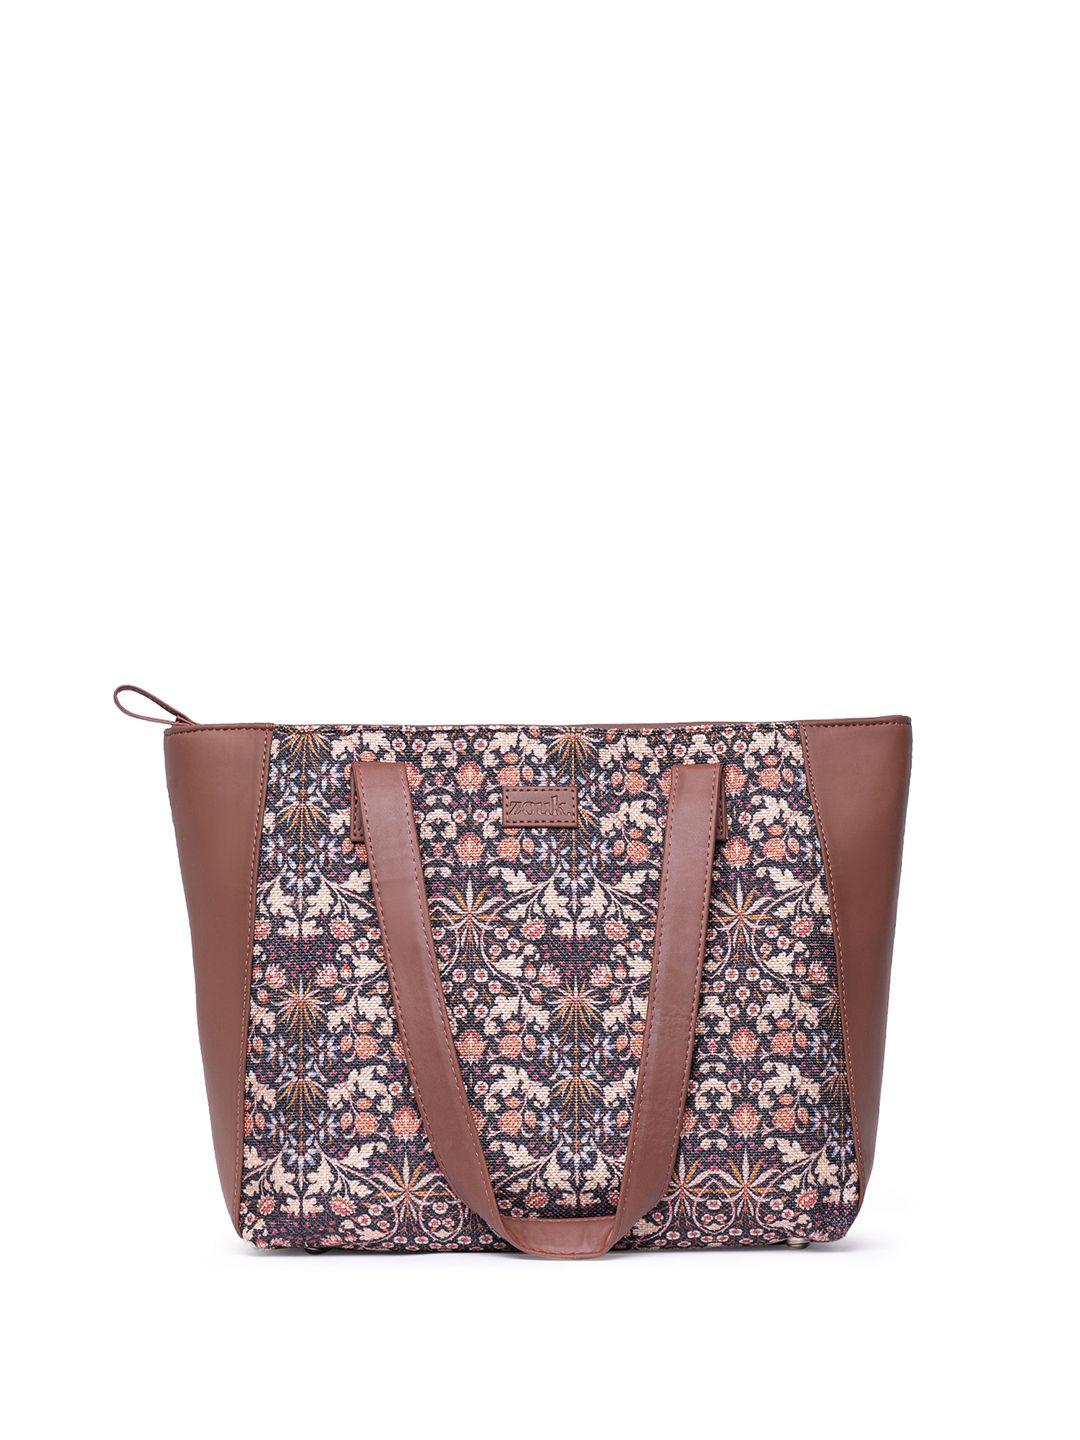 zouk-floral-printed-structured-vegan-leather-tote-bag